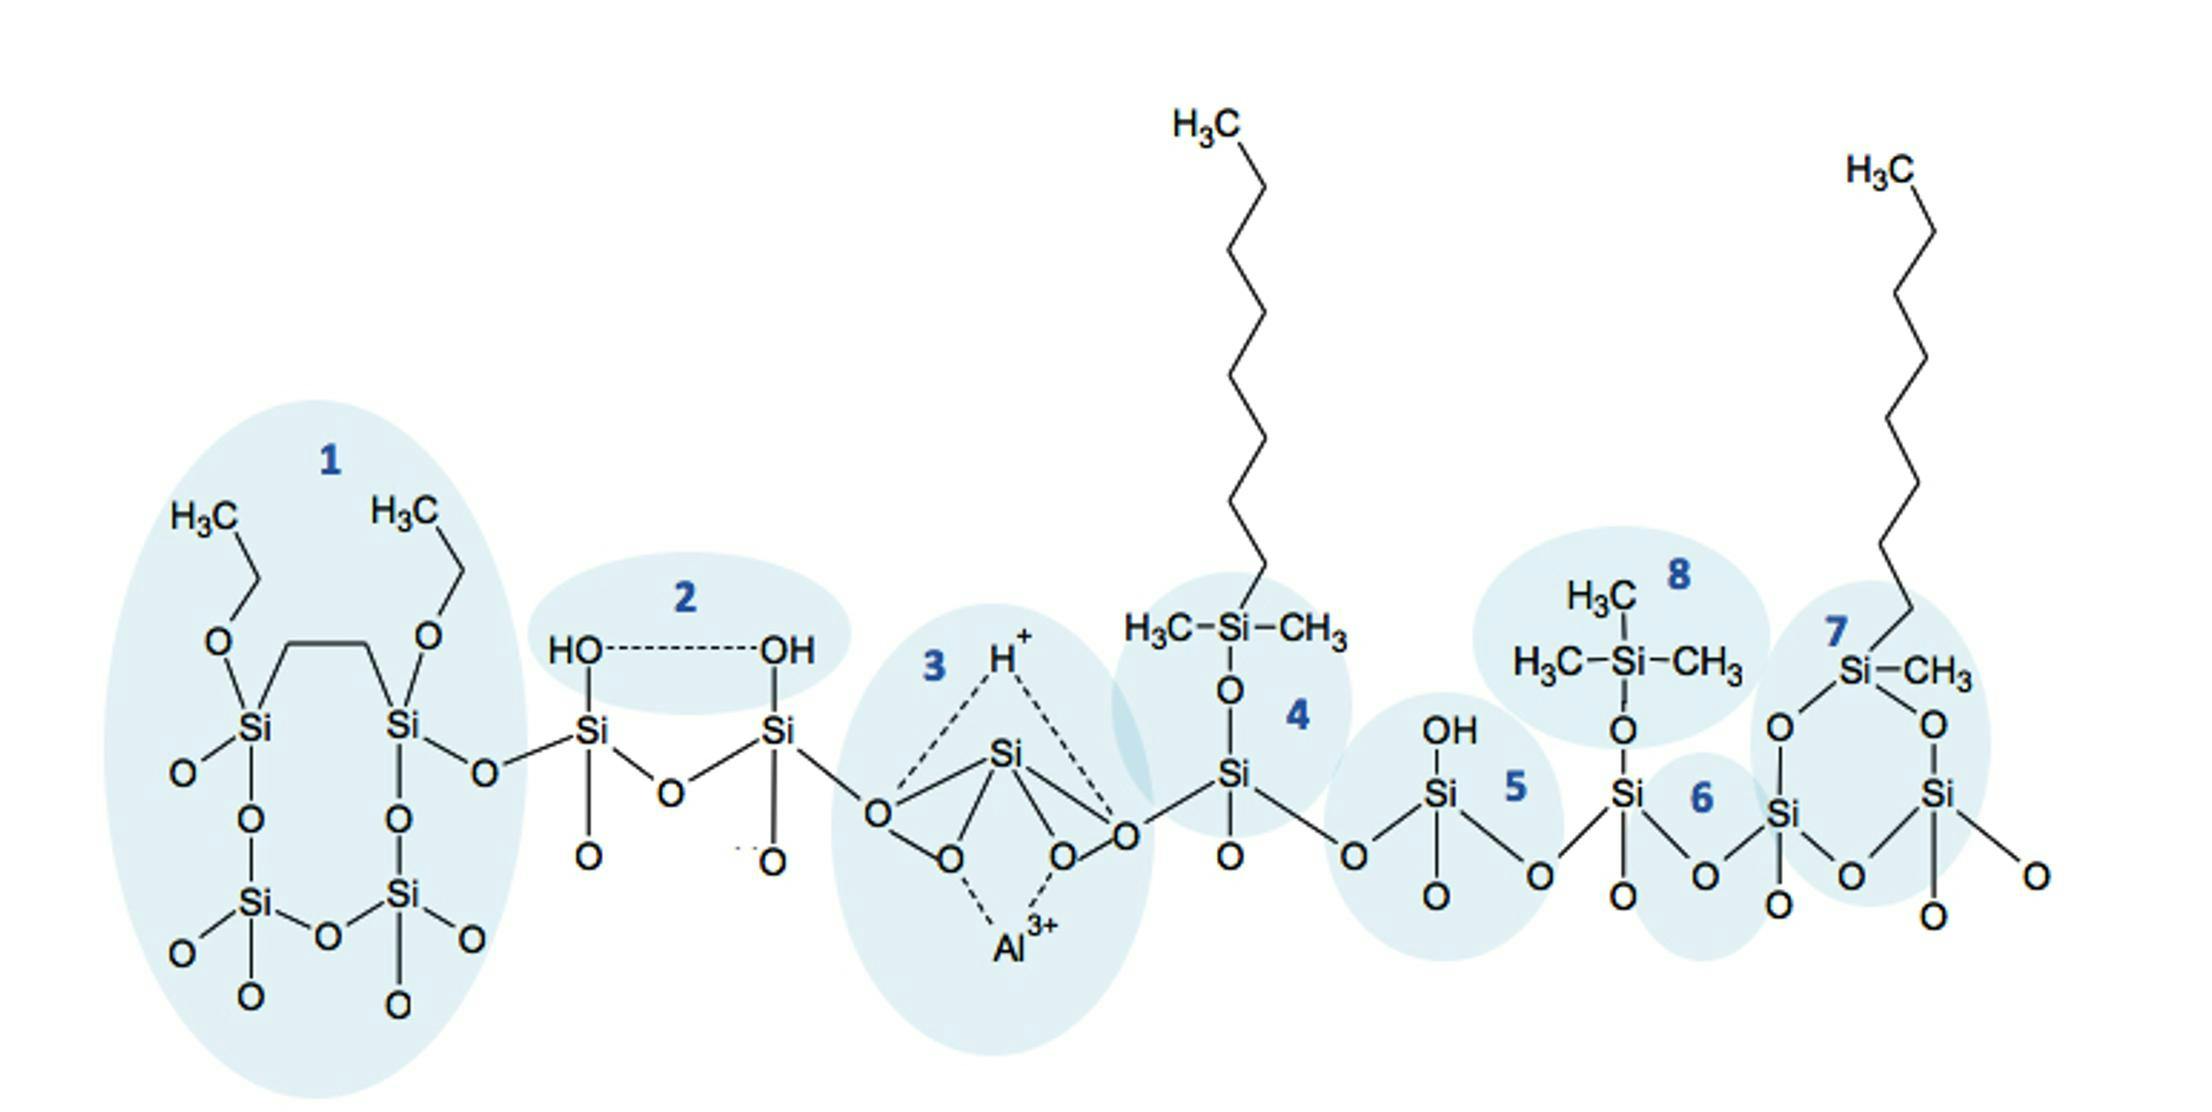 Figure 2: Representations of various silica surface species (note C8 ligands shown in the figure – C18 ligands are recommended in the Pharmacopeial method).